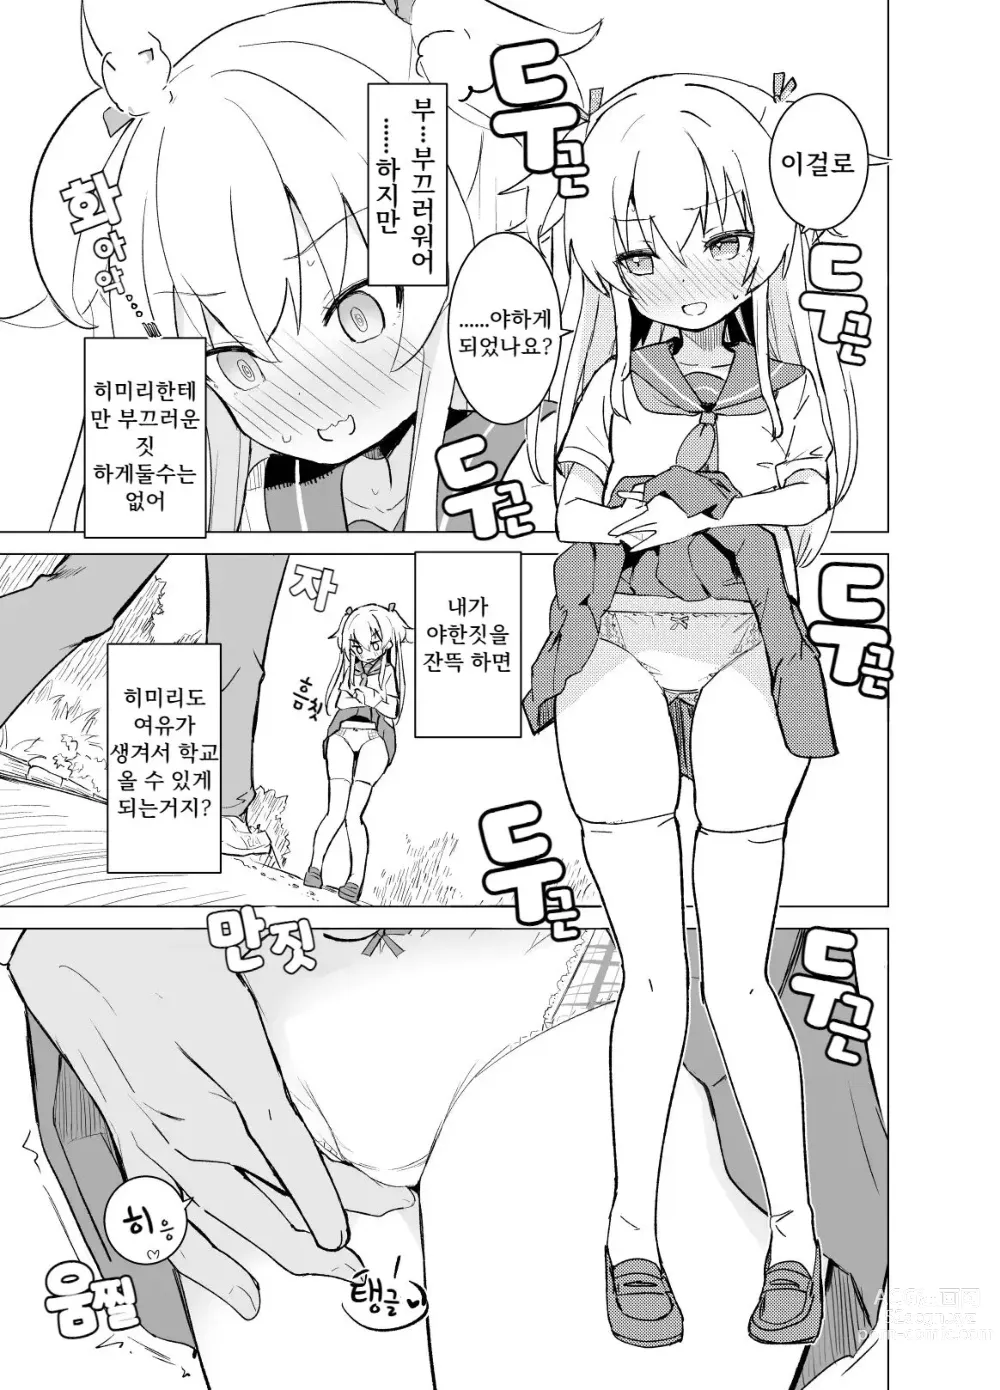 Page 16 of doujinshi S.S.S.Di part 1